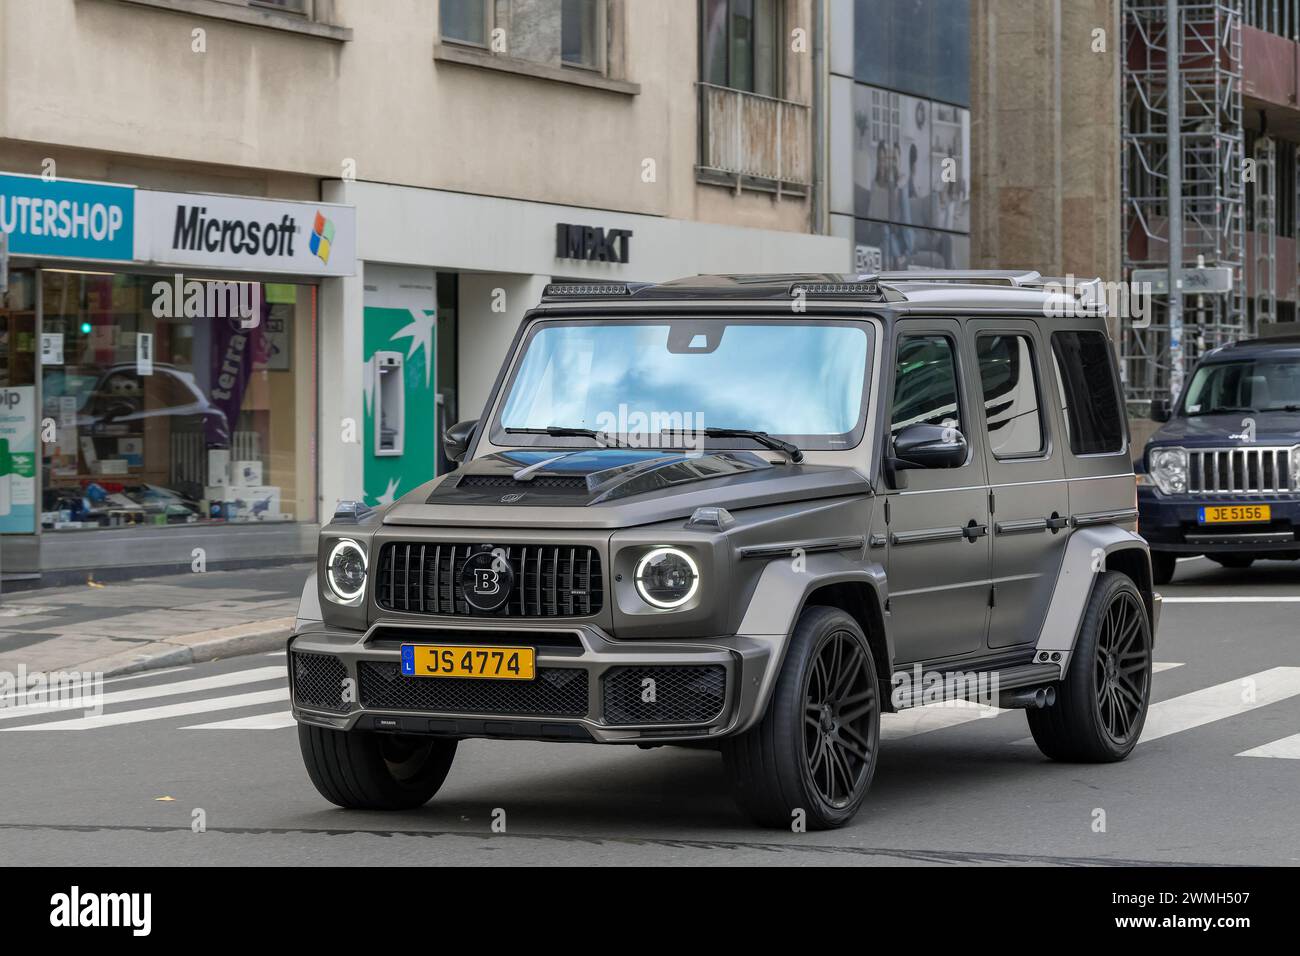 Luxembourg City, Luxembourg - Focus on a matte brown Mercedes-AMG G 63 Brabus driving in a street. Stock Photo